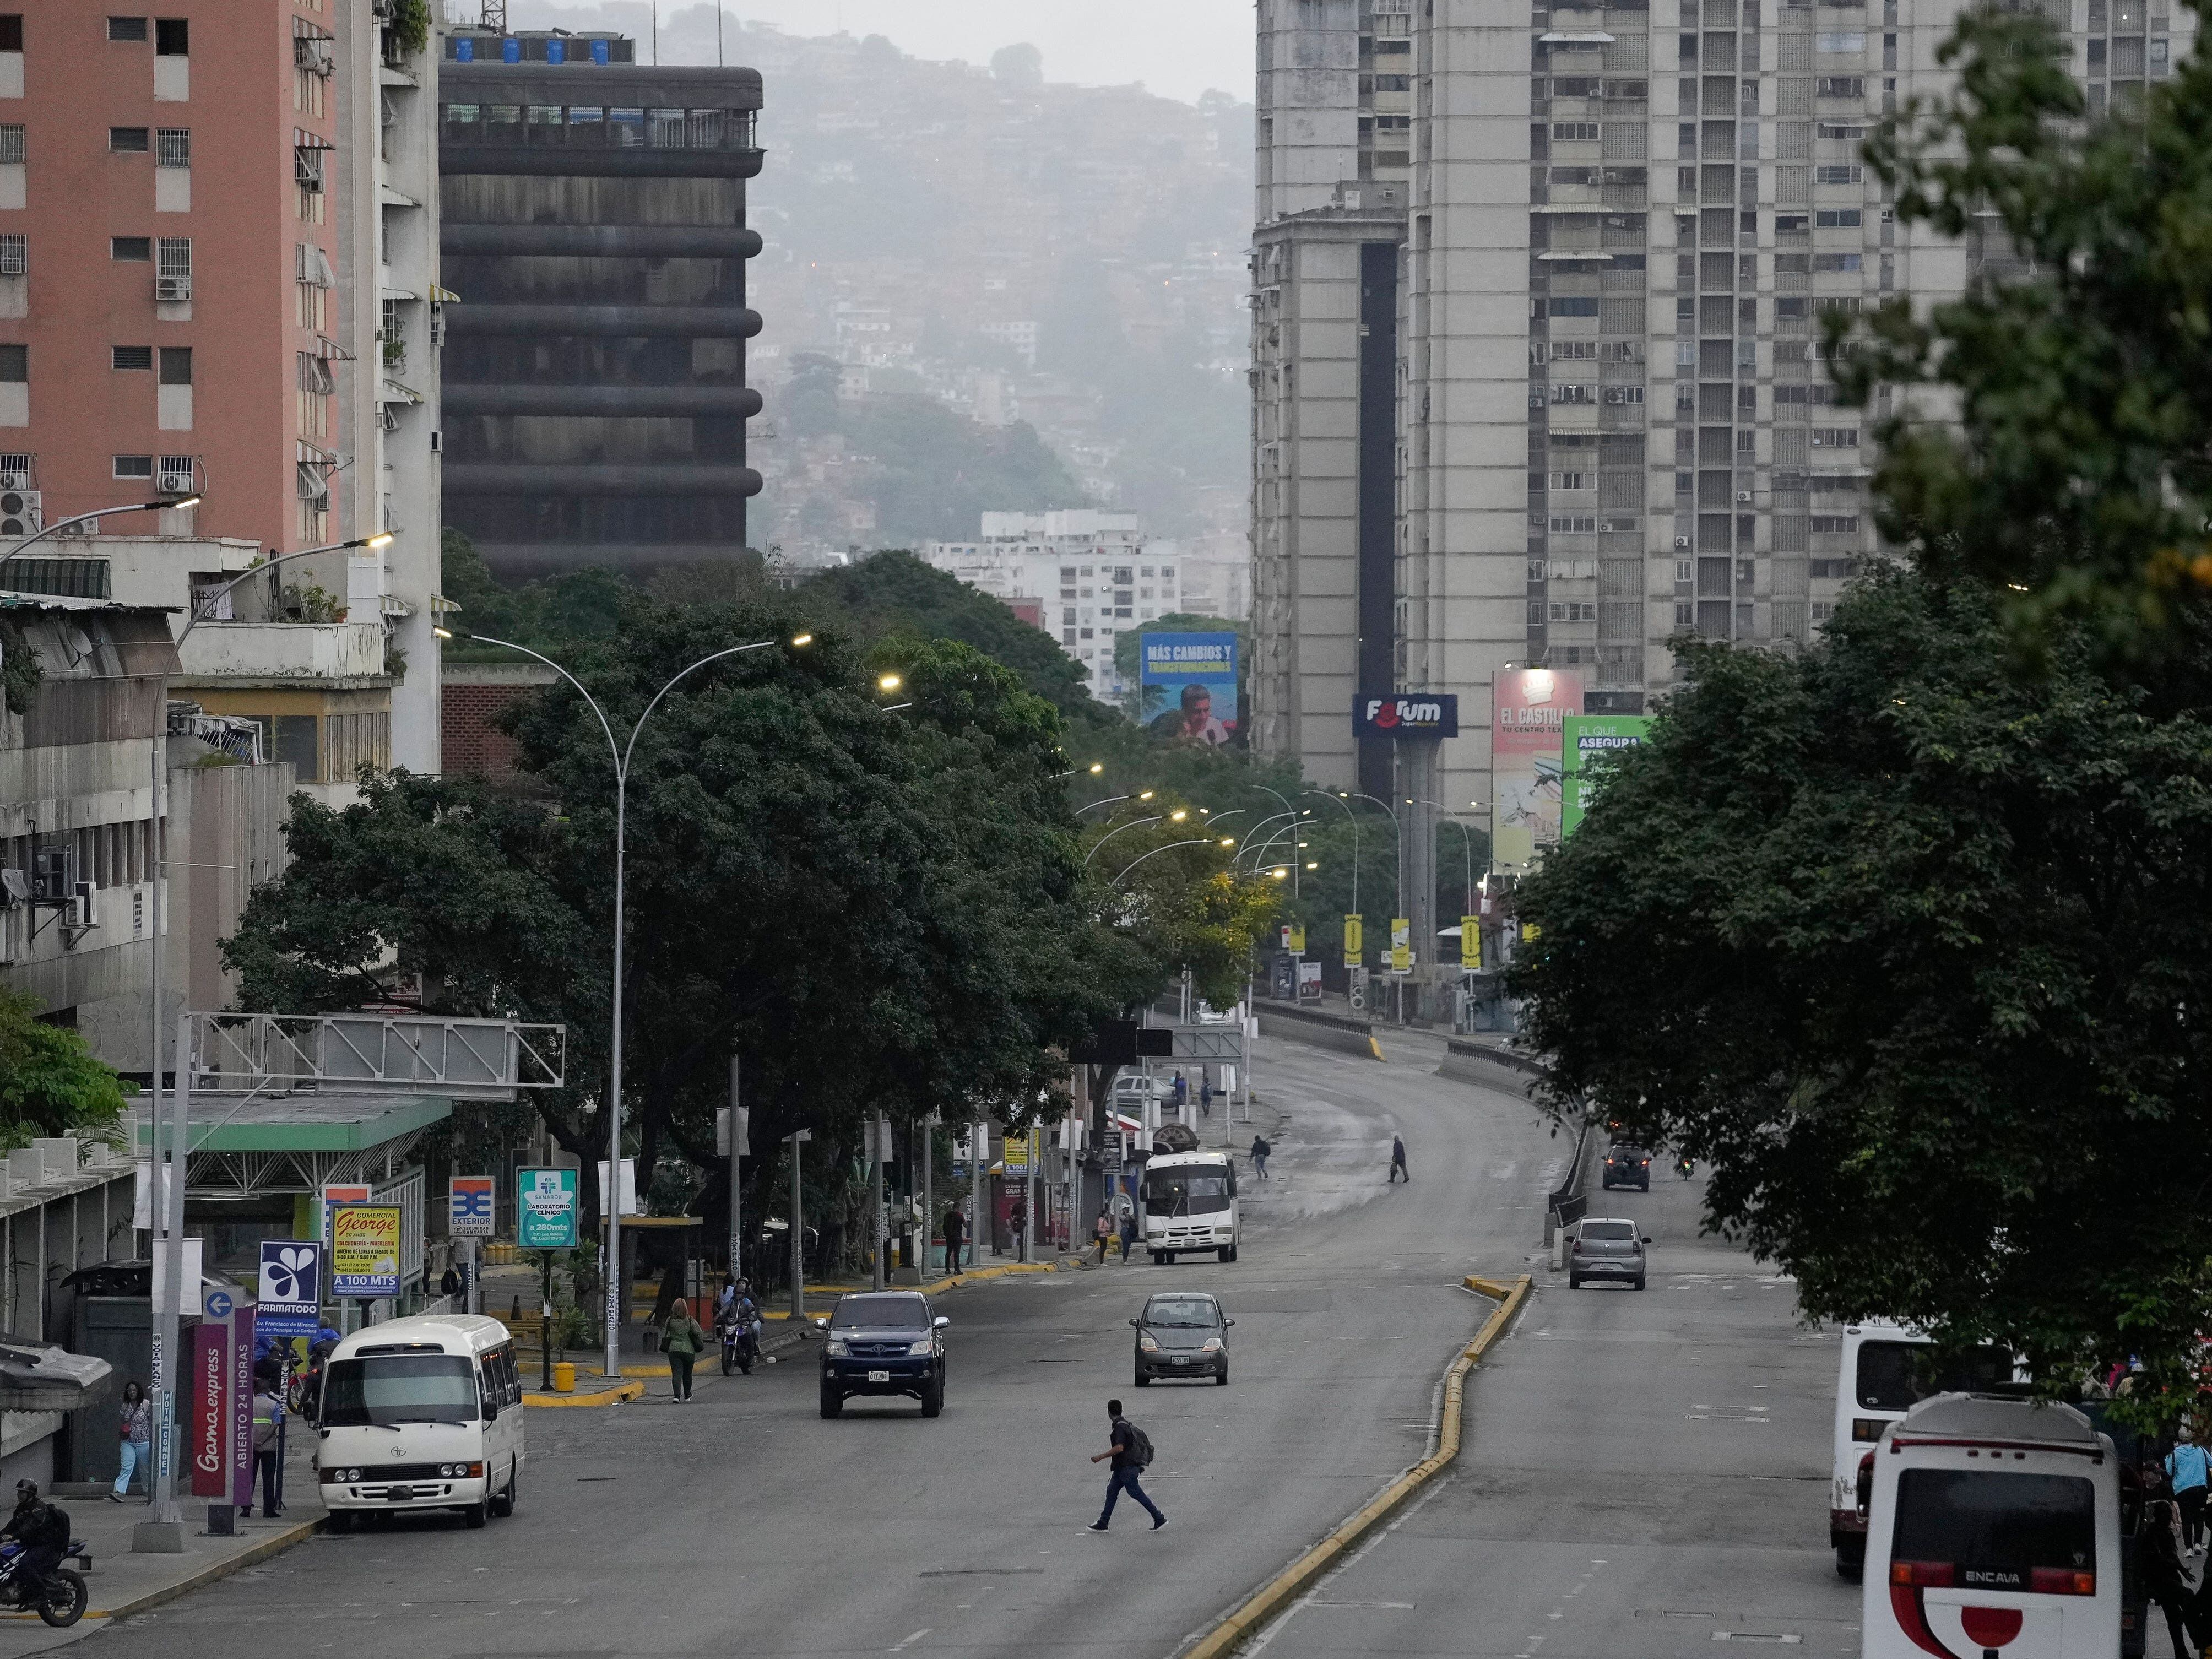 Venezuela capital eerily calm after Maduro and opposition claim election victory